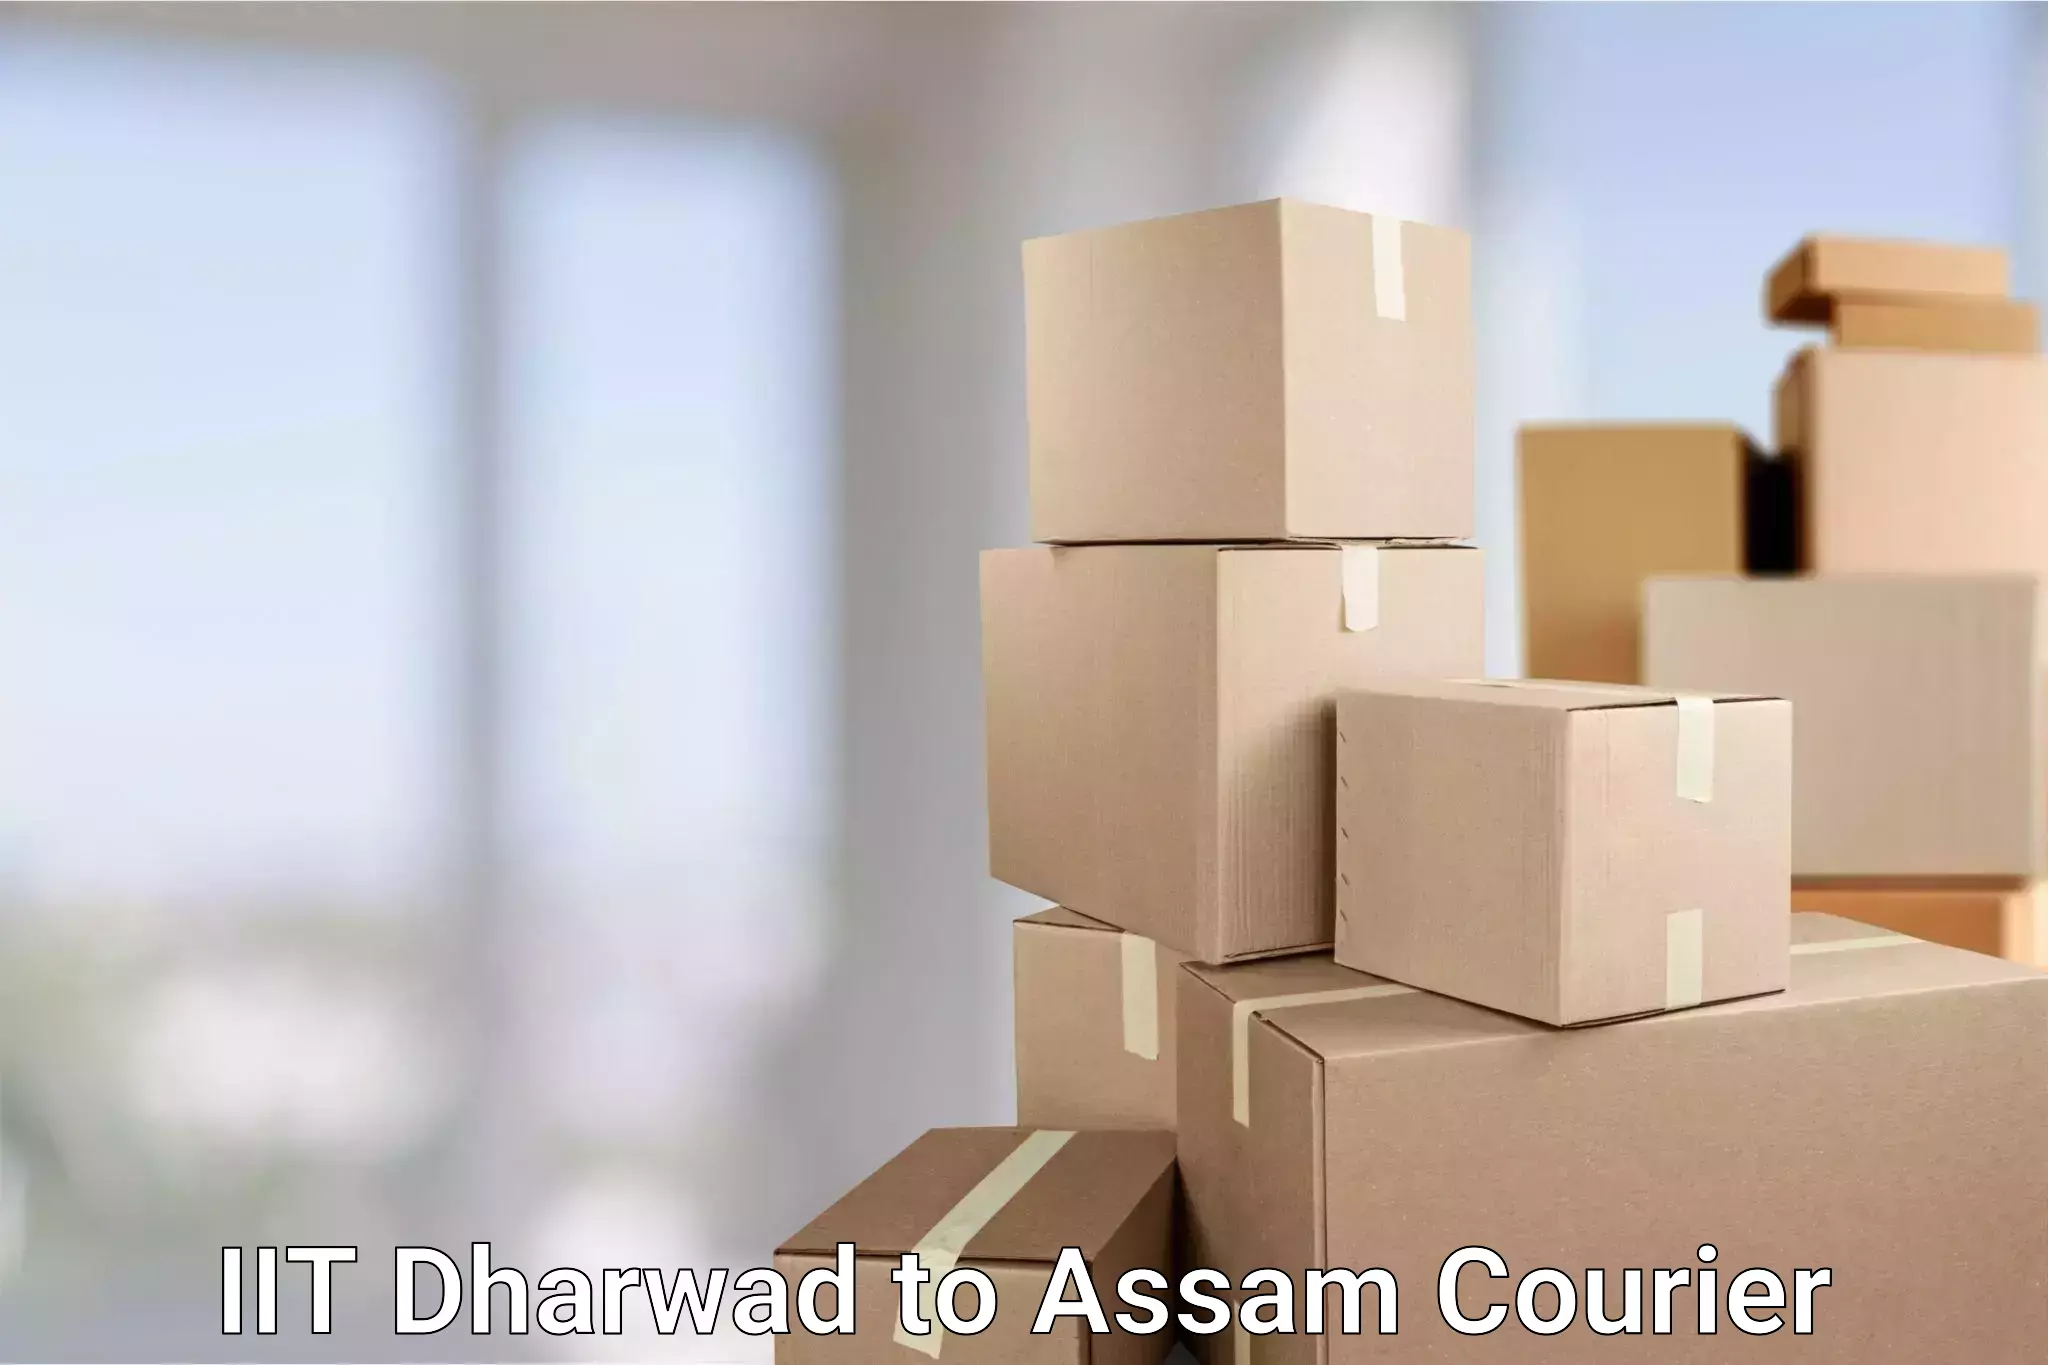 24/7 courier service in IIT Dharwad to Digboi